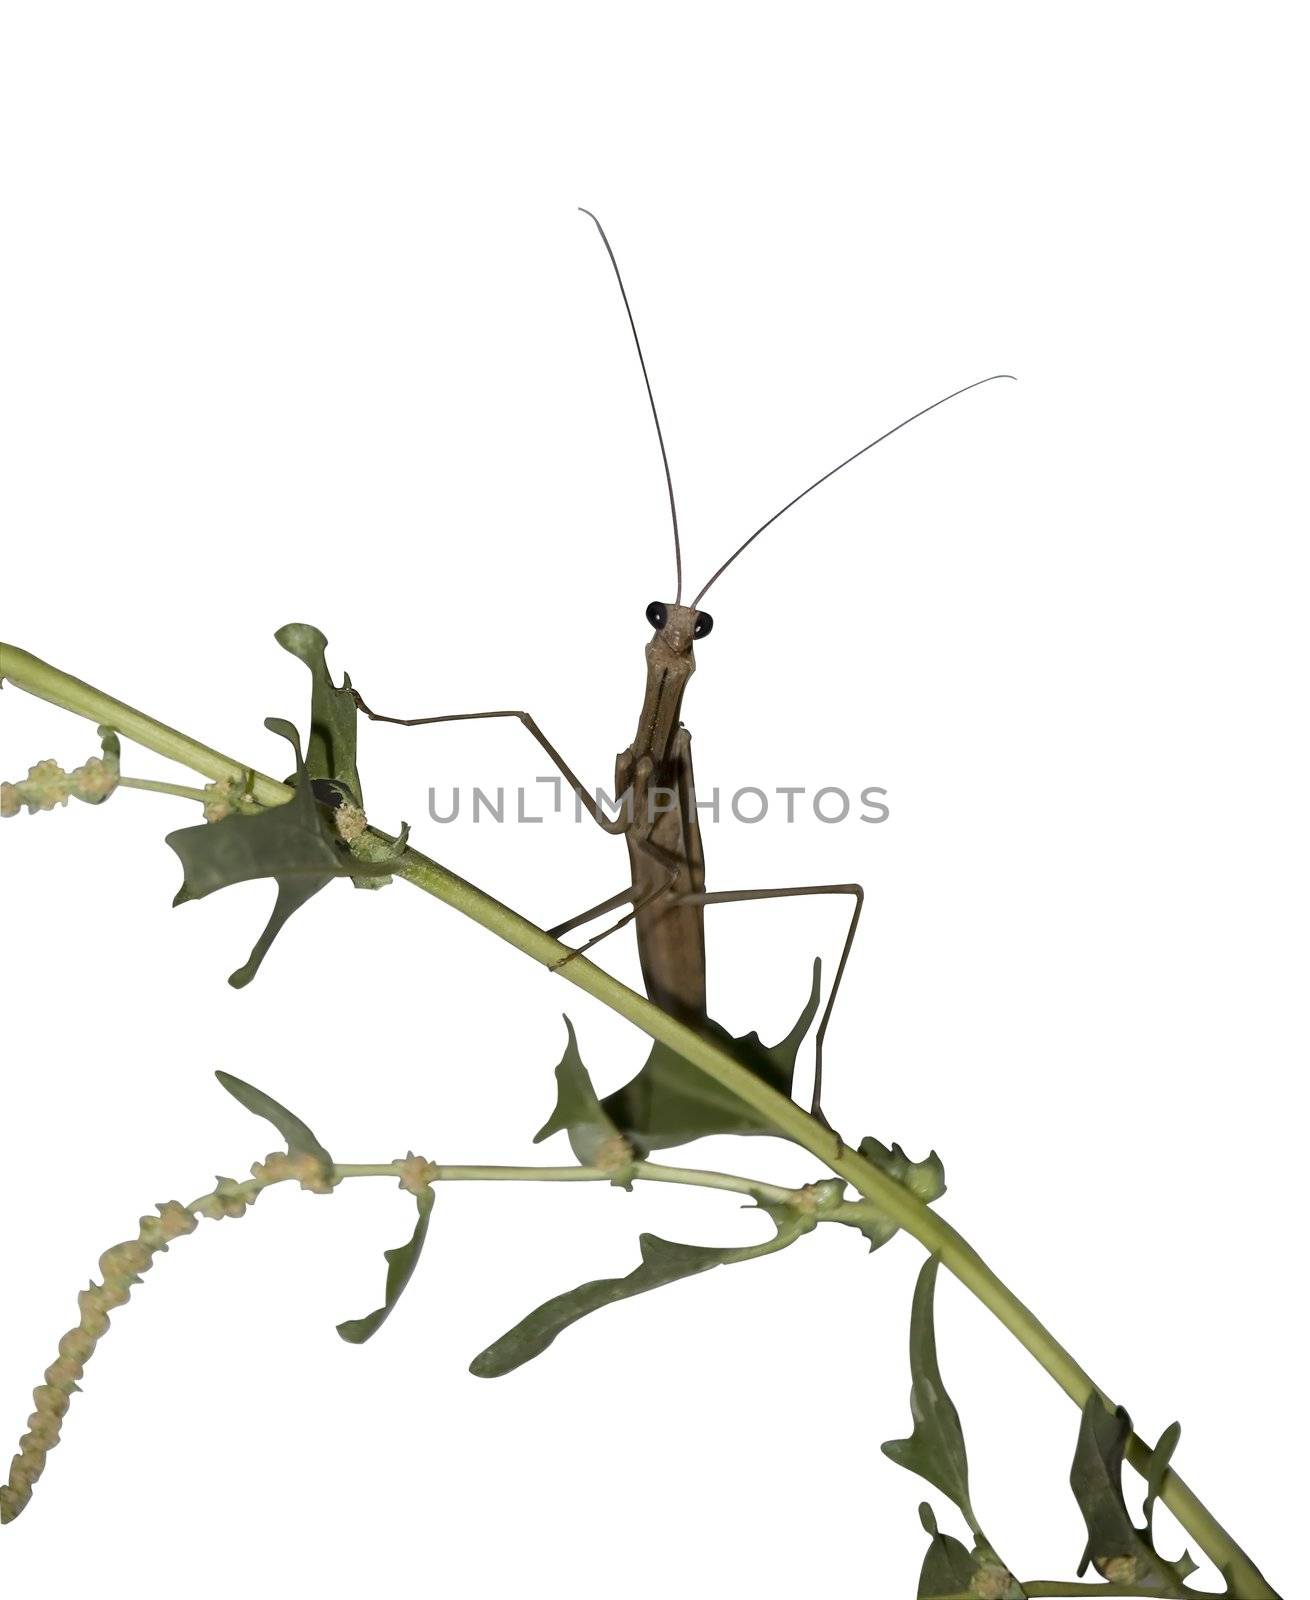 mantis. The insect - mantis-is isolated on a white background